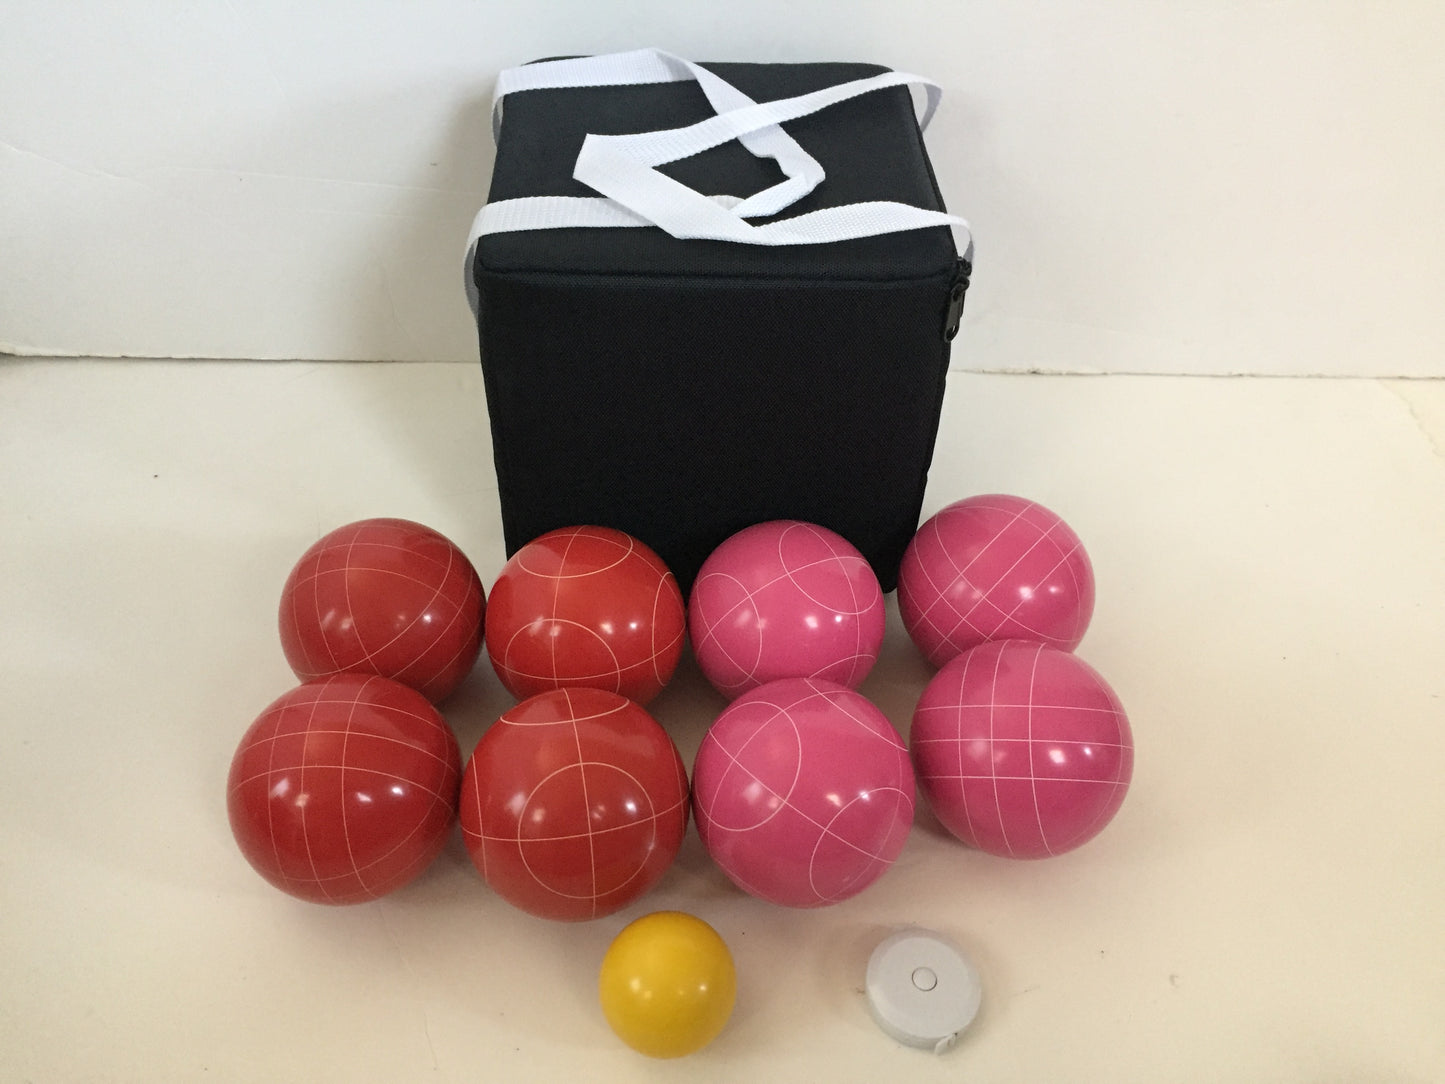 107mm with Pink and Red Balls with Black Bag